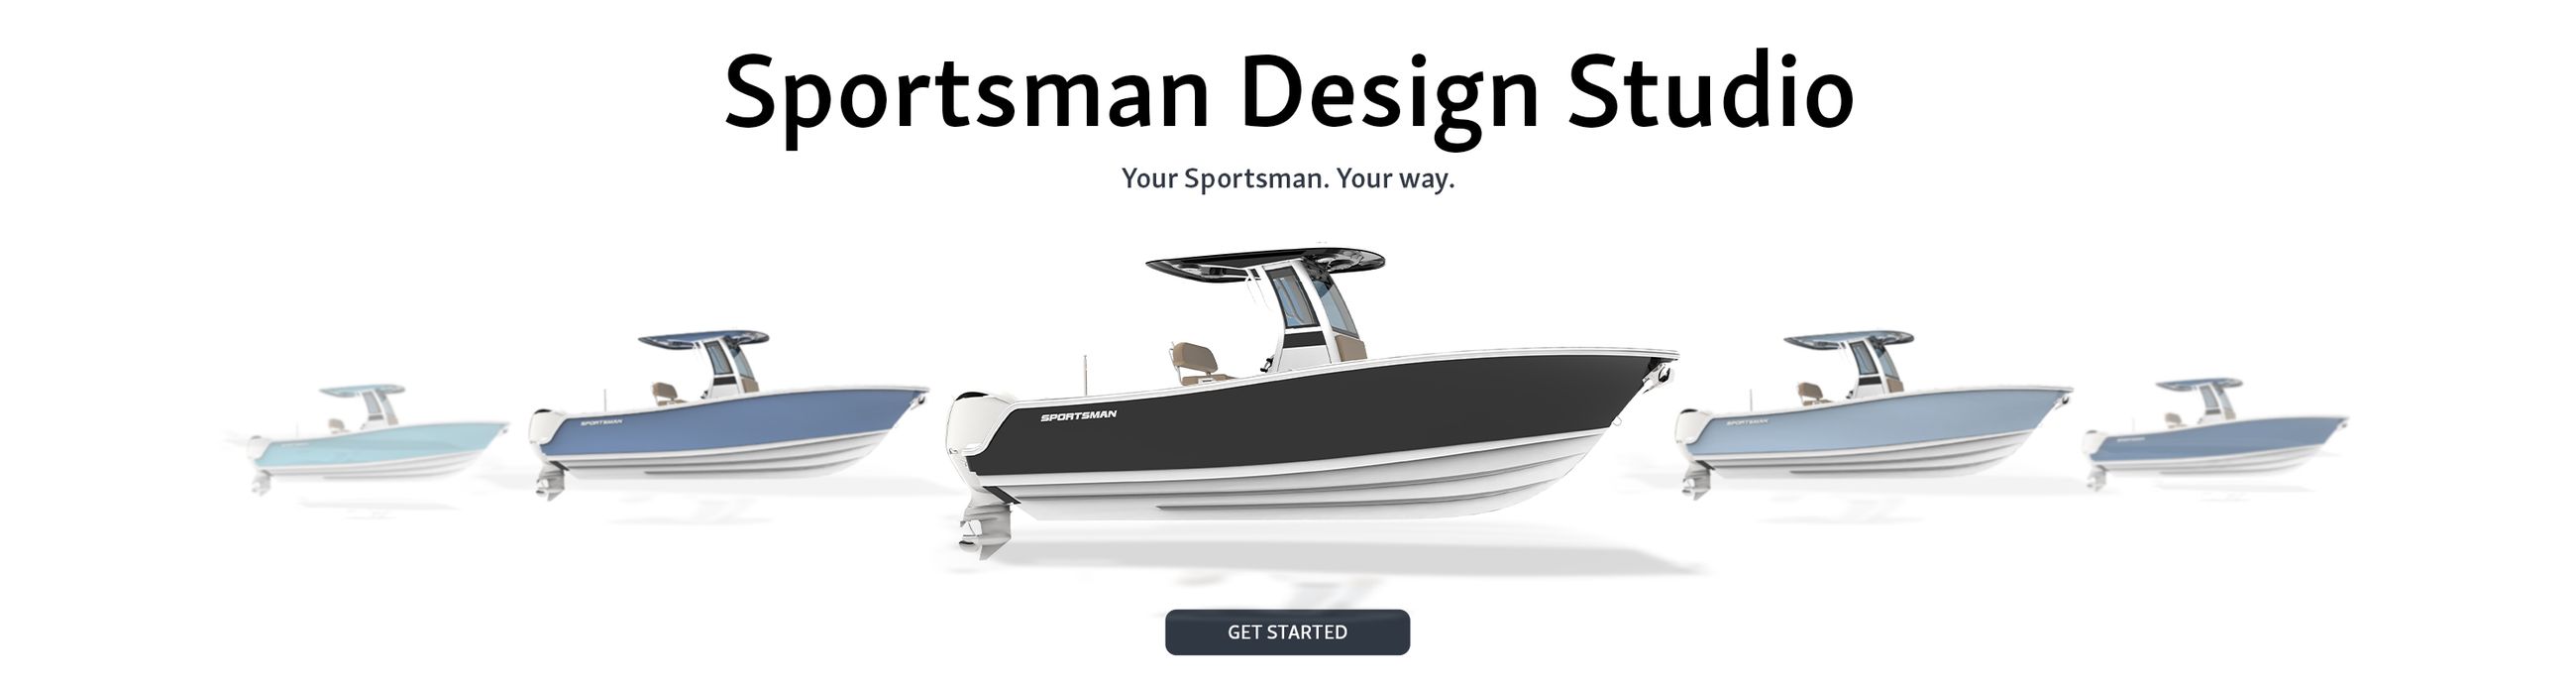 Image of custom colored Sportsman boats inviting people to try out the design studio.